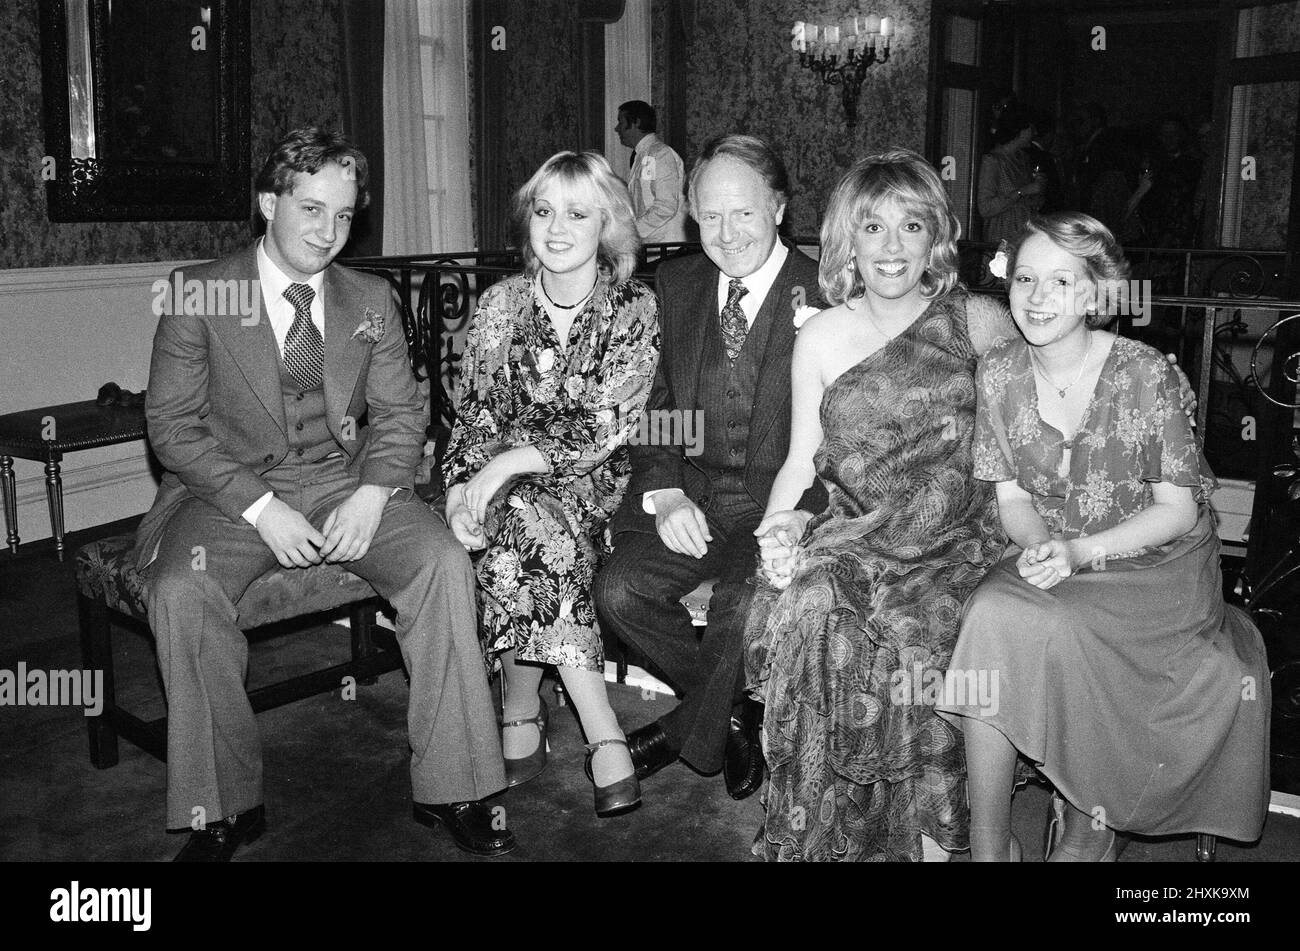 Esther Rantzen and Desmond Wilcox at their wedding reception in Knightsbridge. They are pictured with his three children, Adam, 17, Cassandra, 19, and Clair, 17 (twin to Adam). Esther is expecting a baby in January. 2nd December 1977. Stock Photo